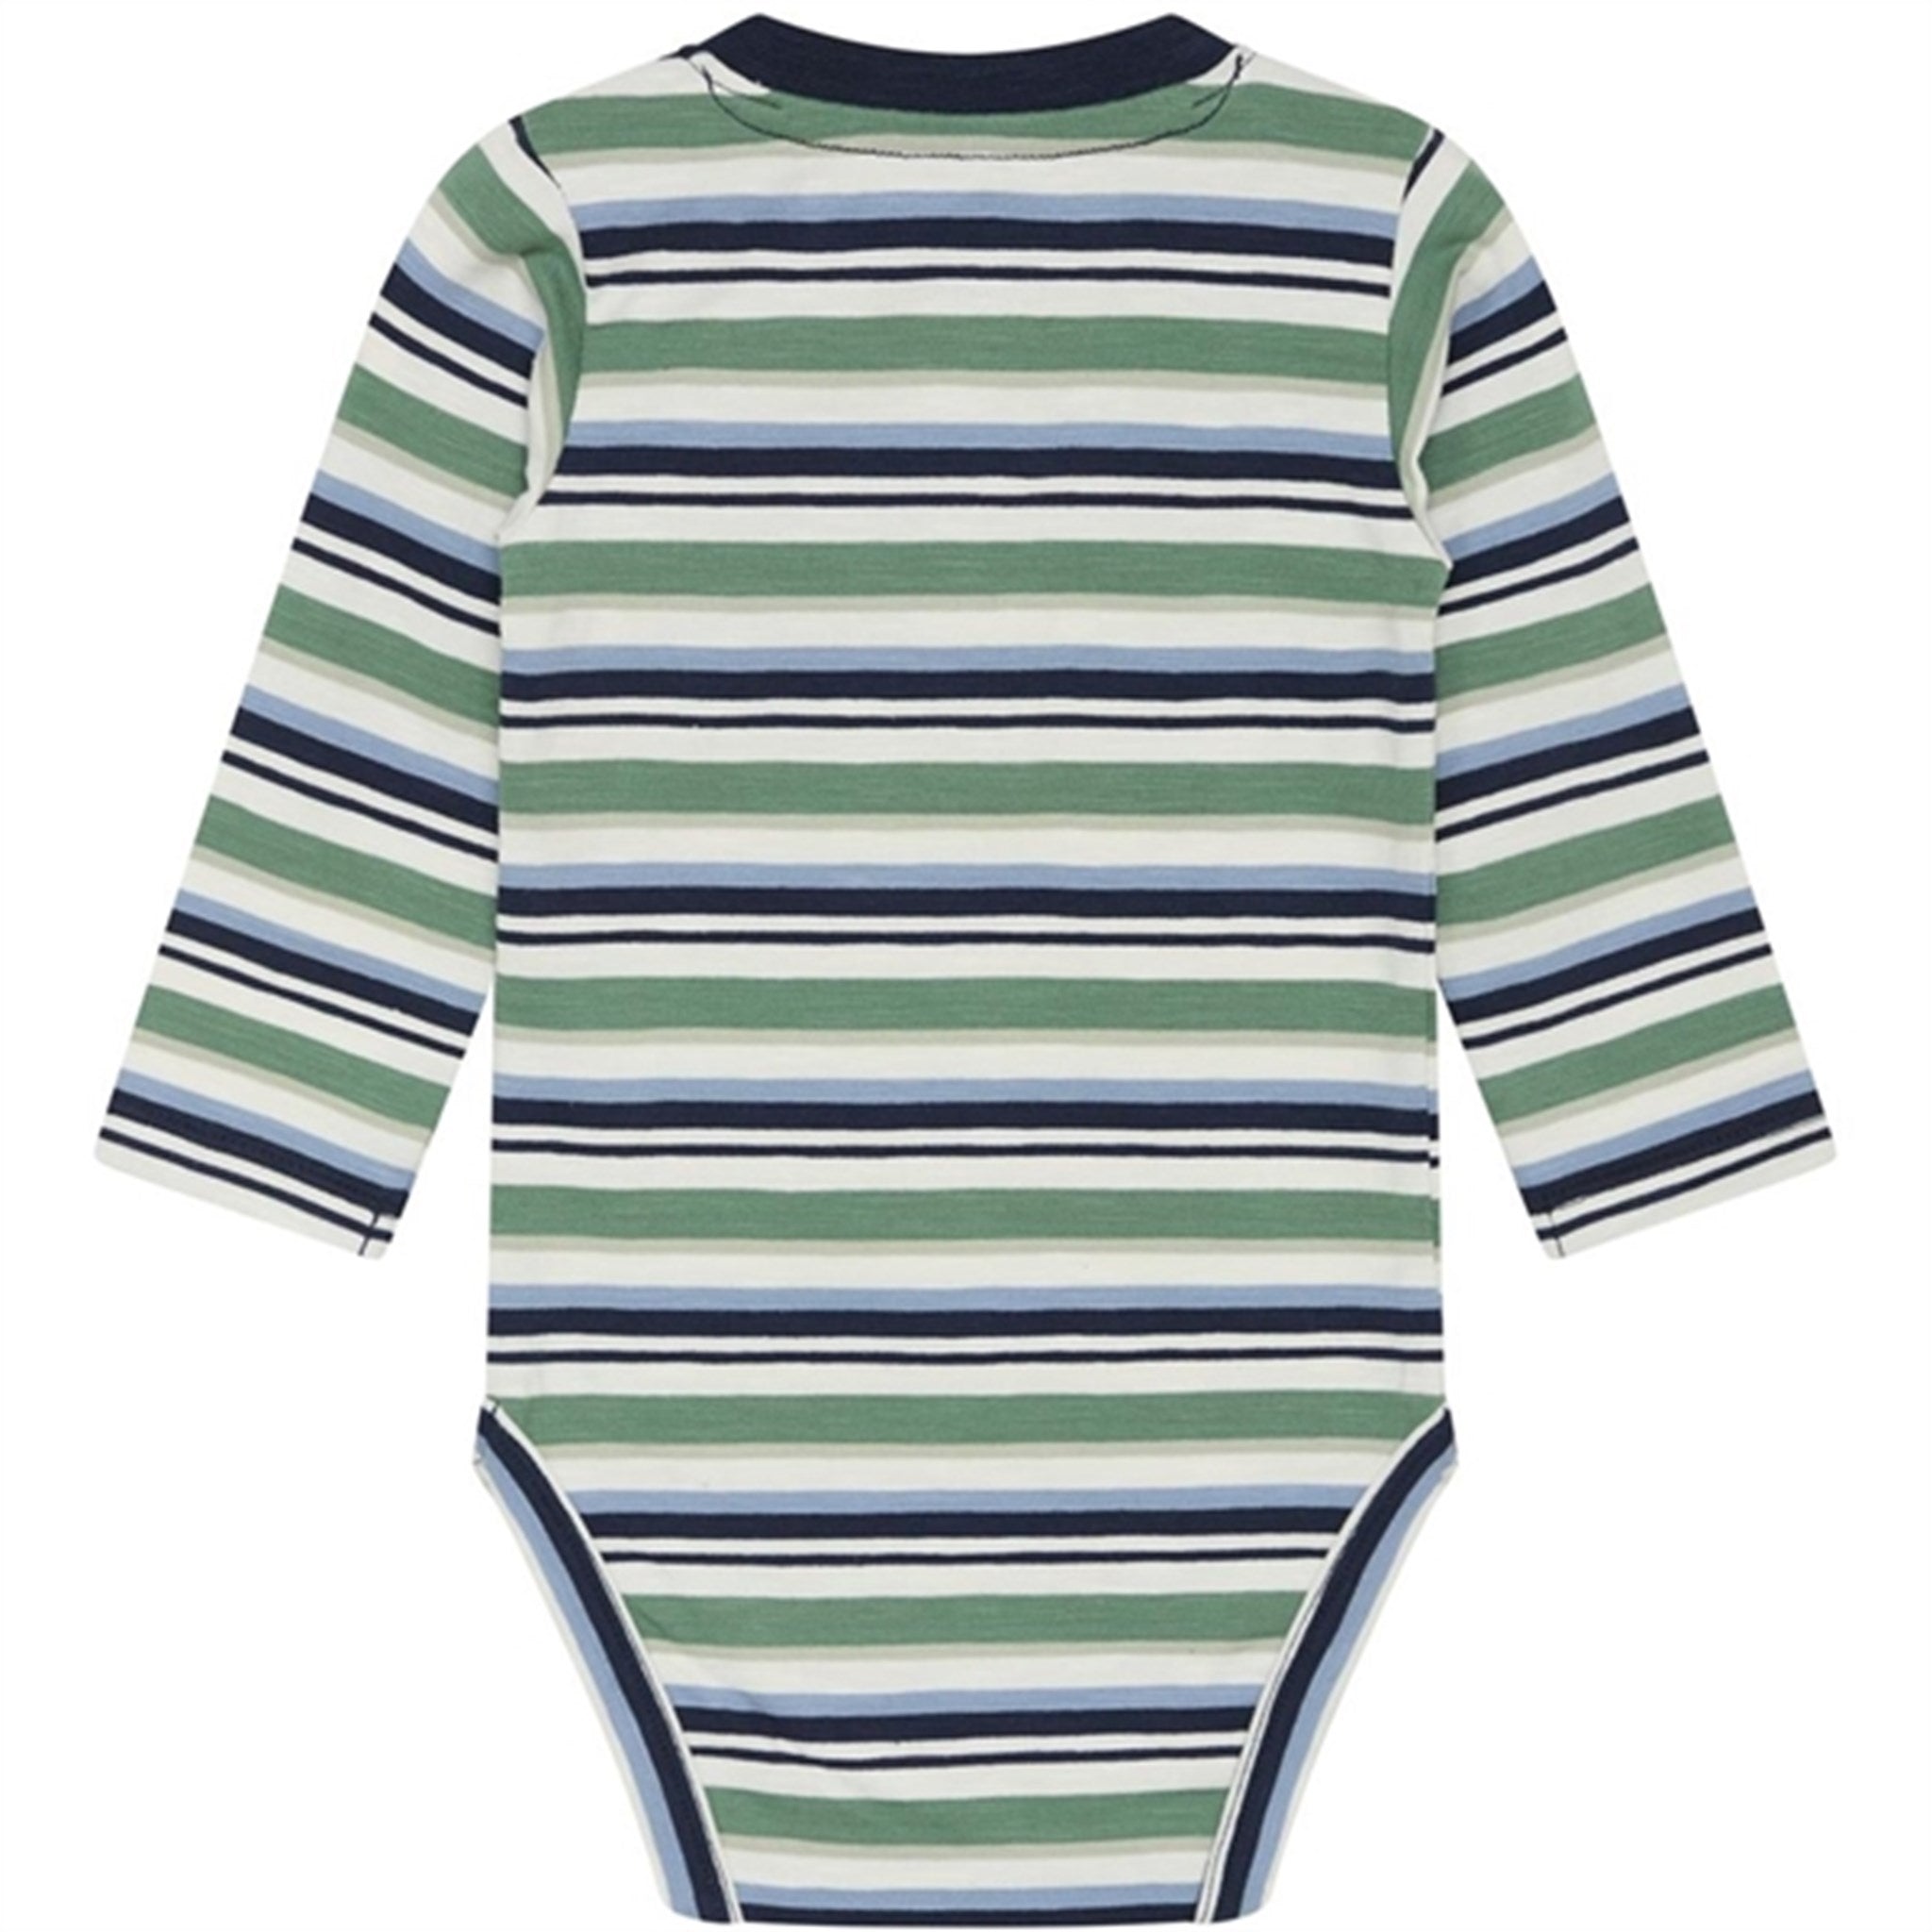 Hust & Claire Spruce Bjorn Body 3